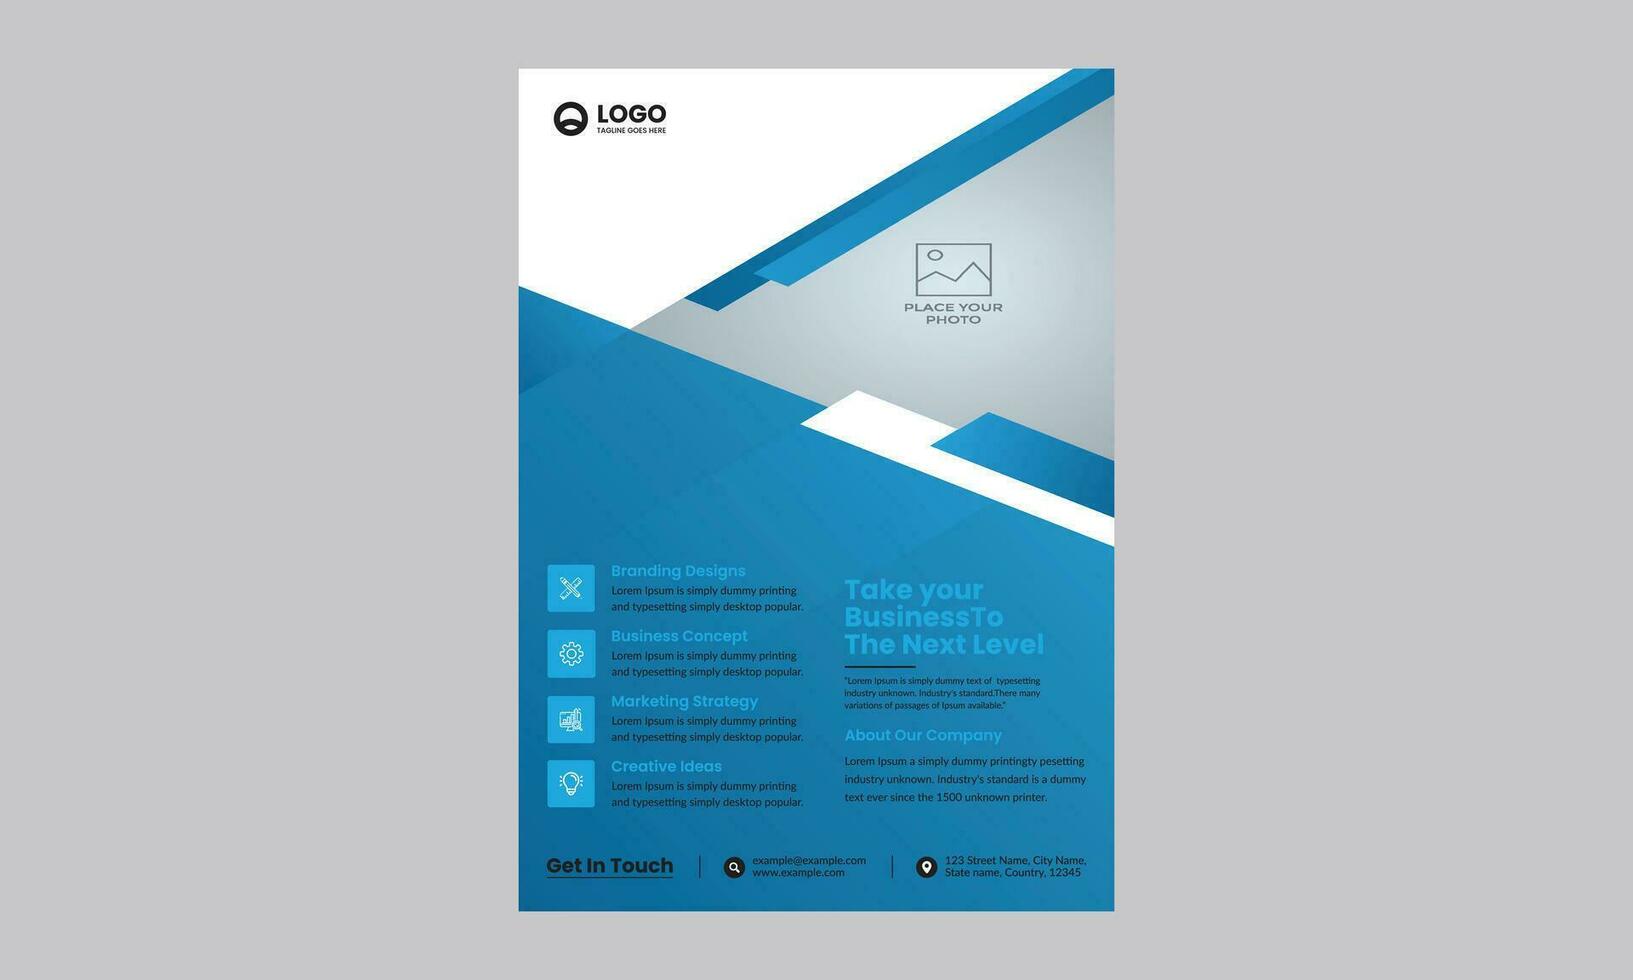 Brochure design, cover modern layout, annual report, poster, flyer in A4 vector